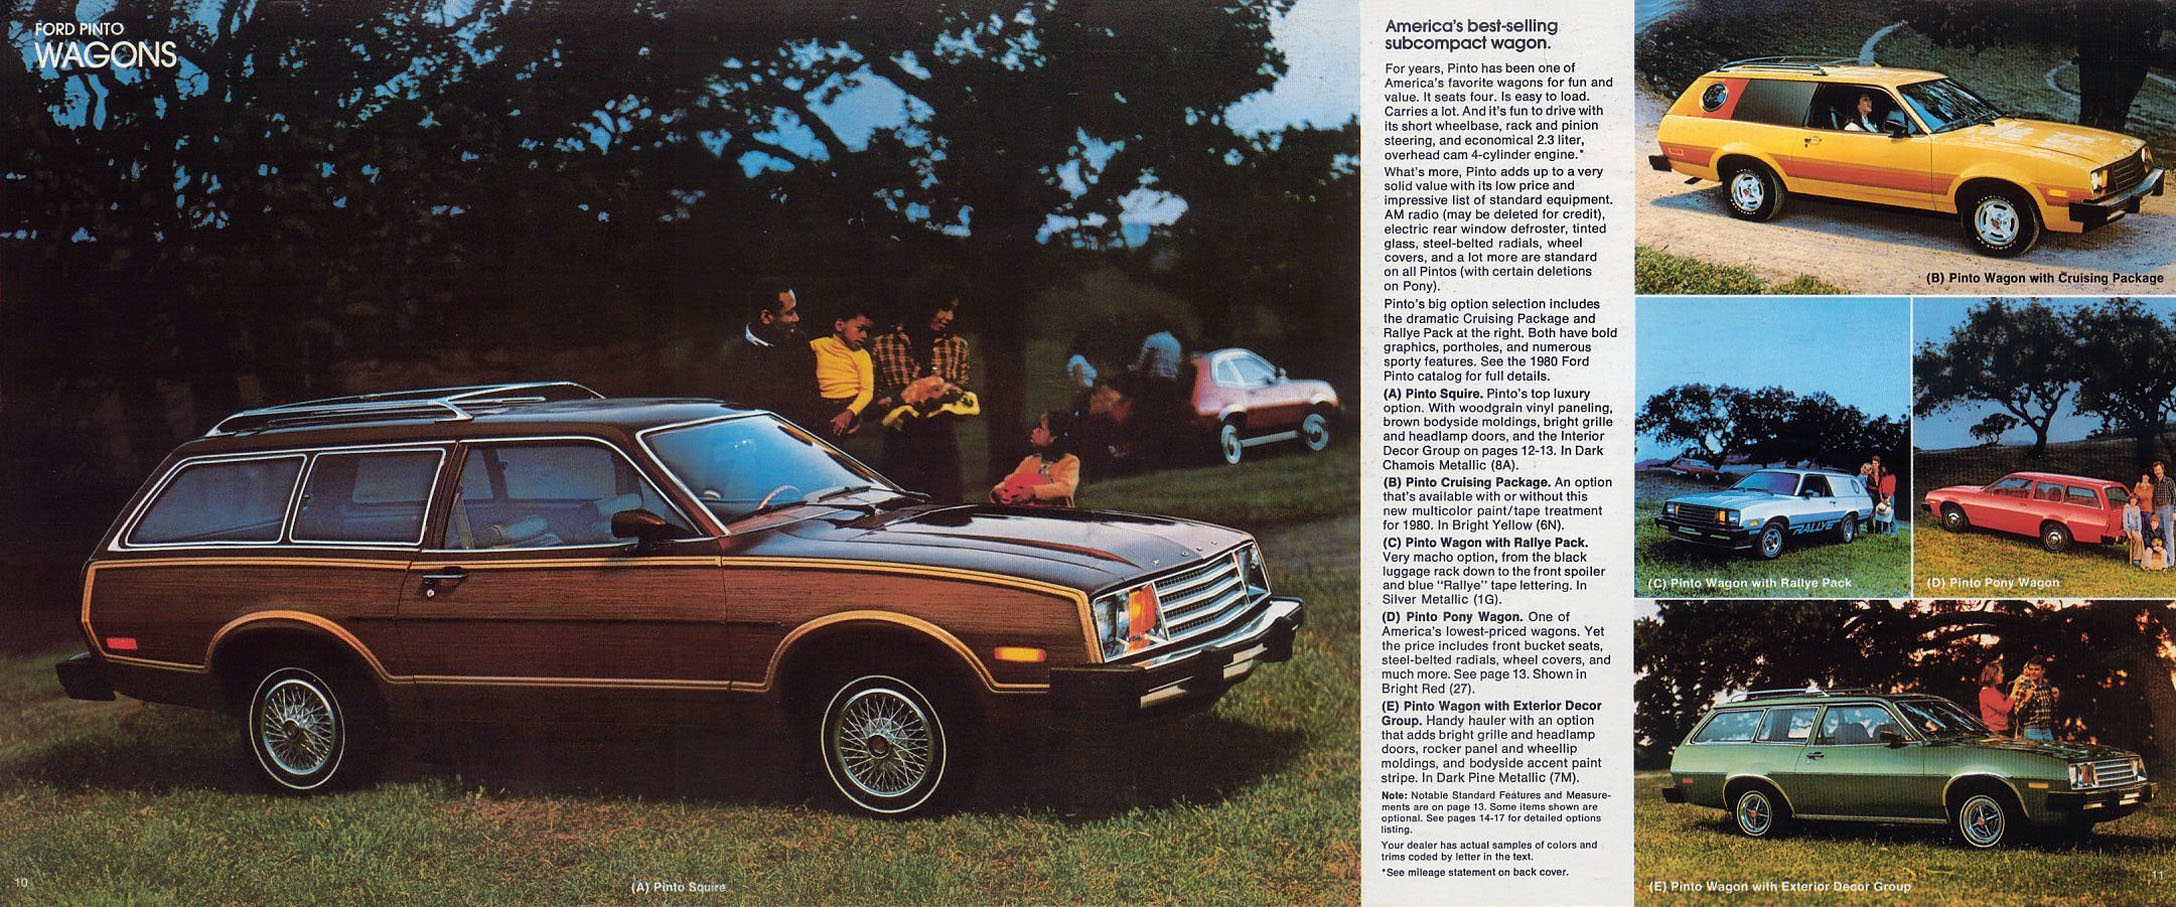 1980 Ford Wagons Brochure Page 6